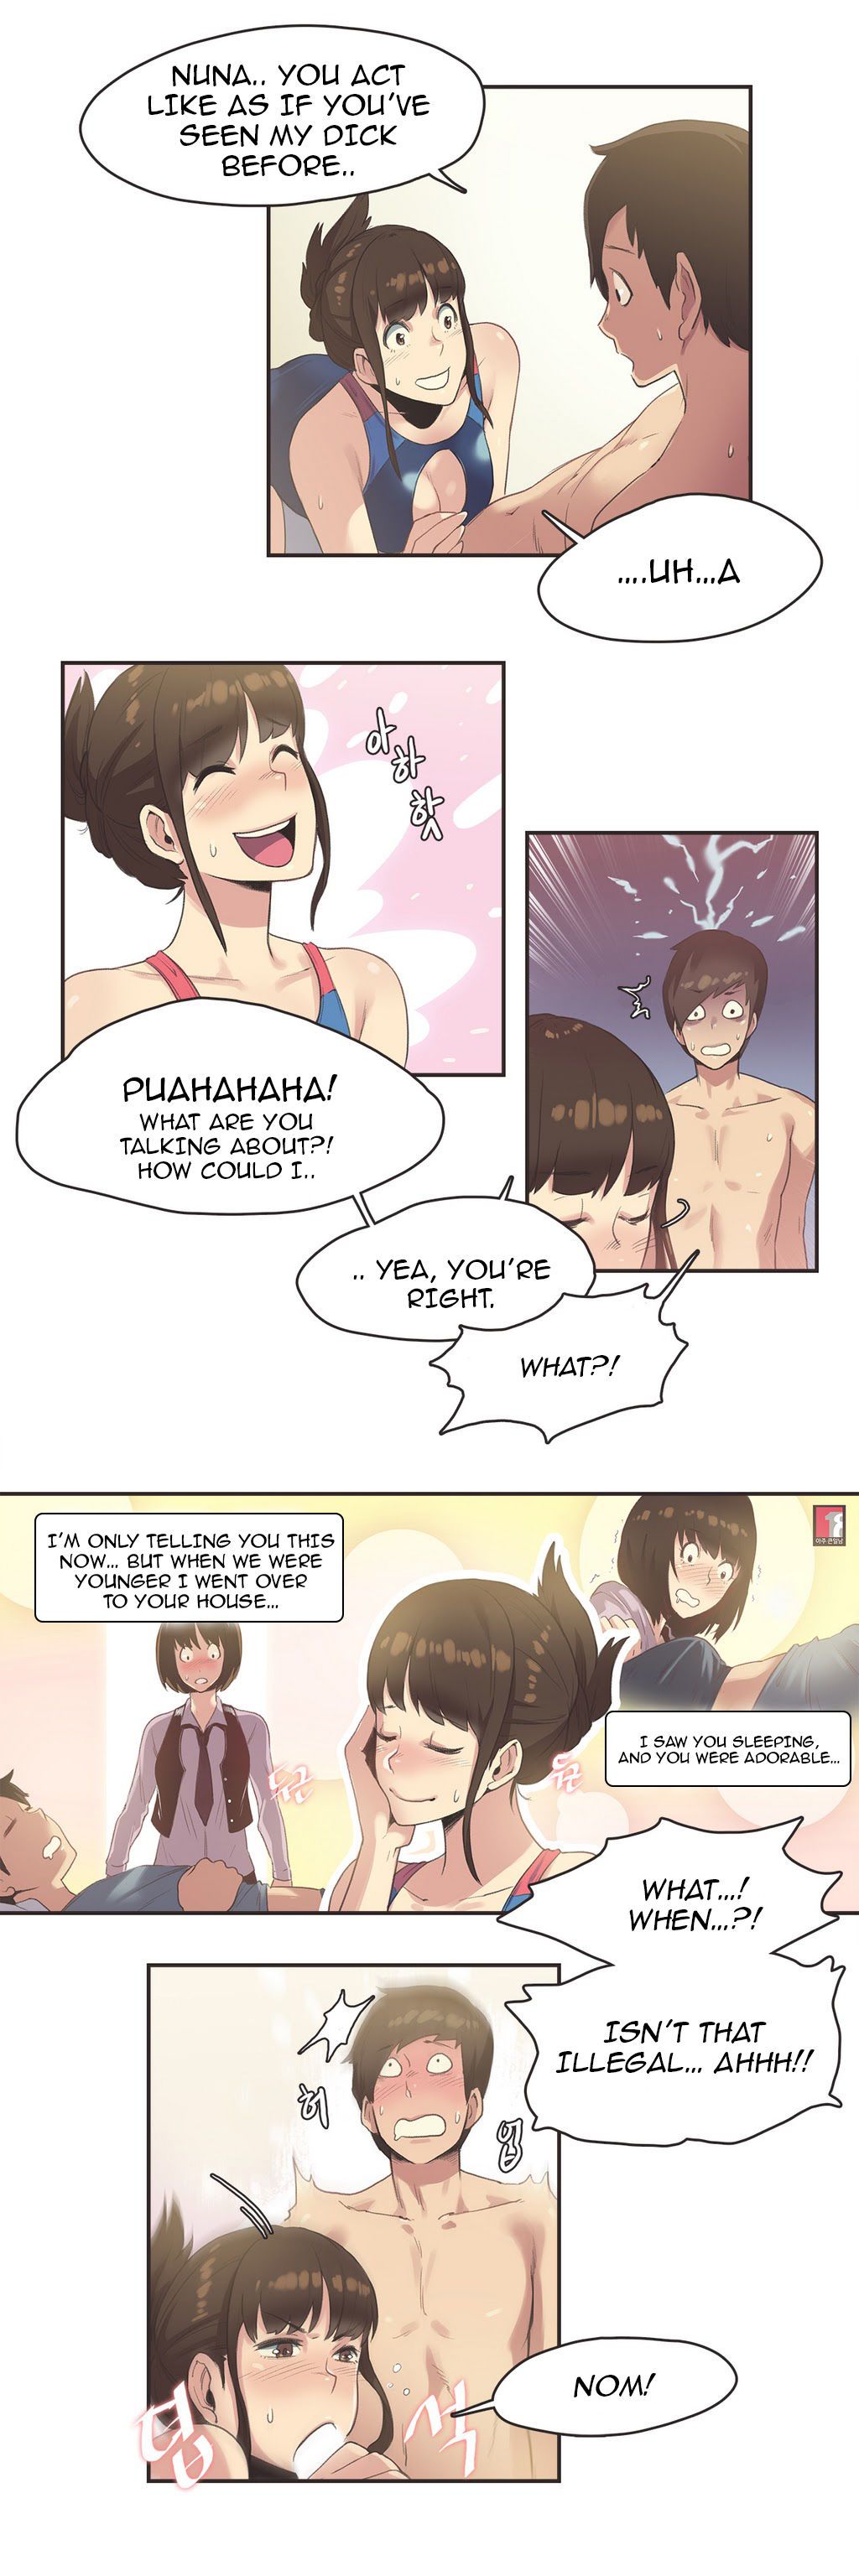 gamang sports Fille ch.1 28 () (yomanga) PARTIE 7